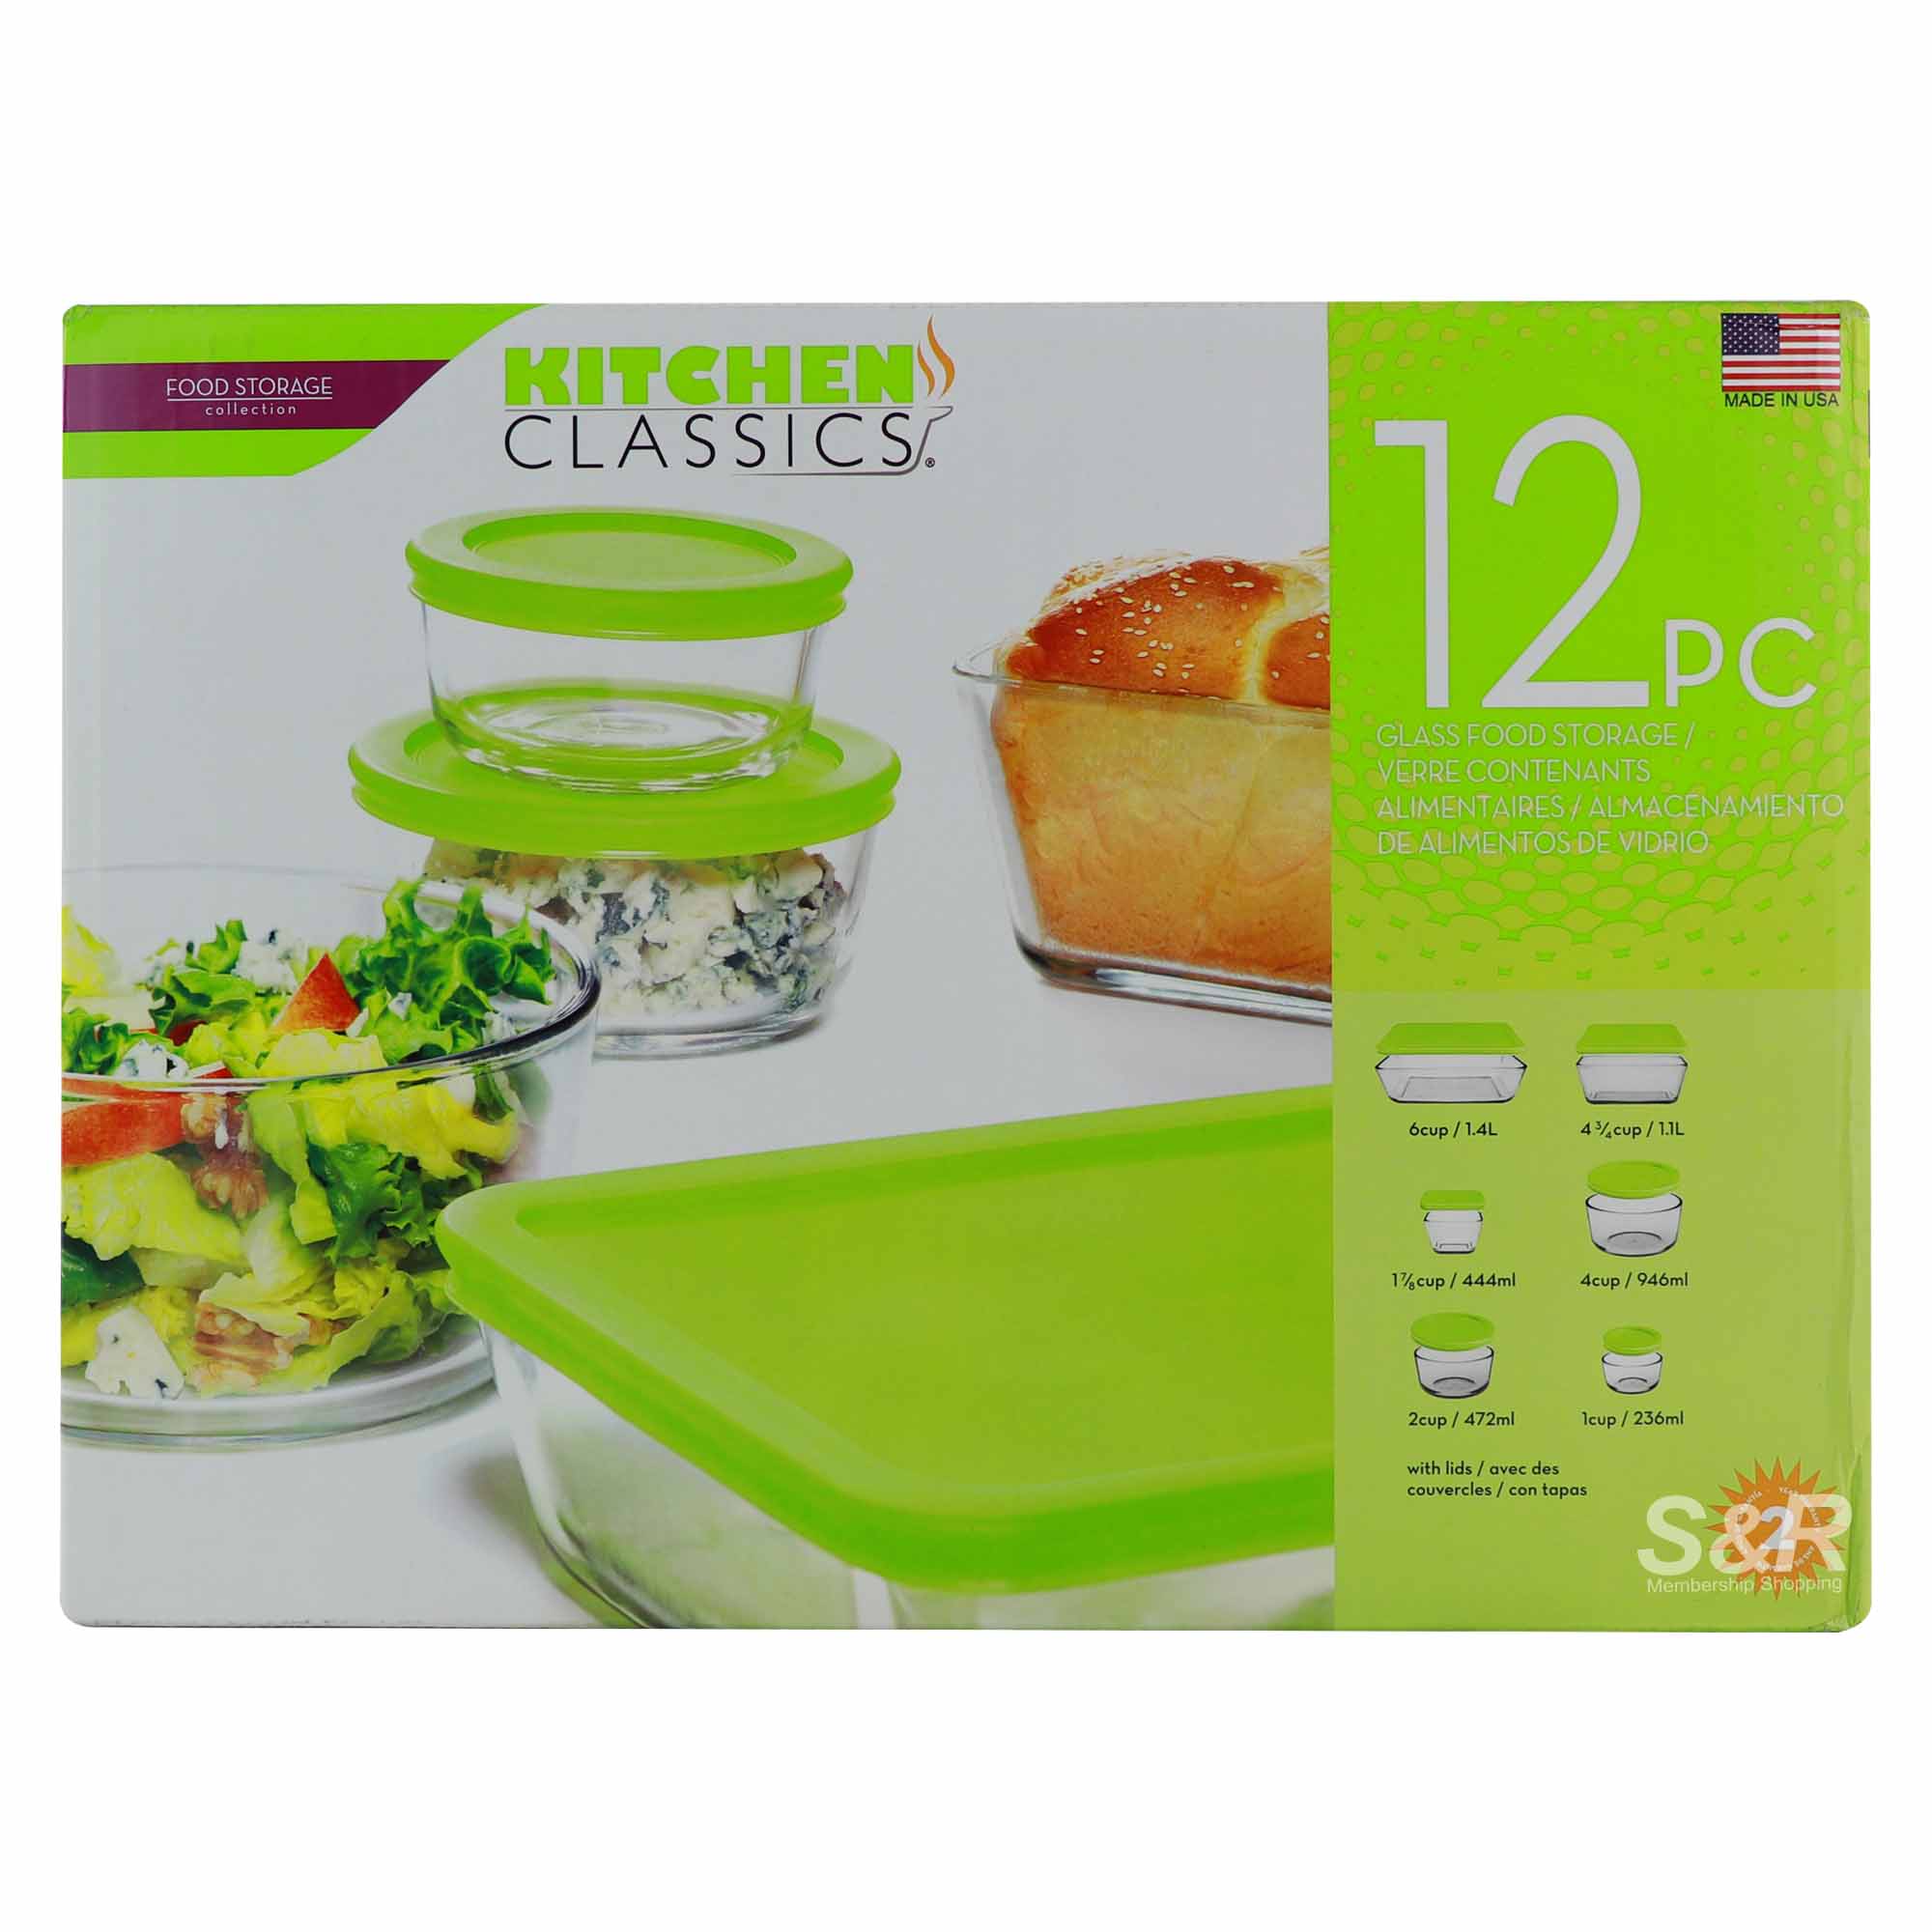 https://www.snrshopping.com/upload/product/Kitchen-Classics-Food-Storage-Collection-Glass-Food-Storage-12pcs-6268/Kitchen%20Classics%20Food%20Storage%20Collection%20Glass%20Food%20Storage%2012pcs-8GjujQHNtz.jpg